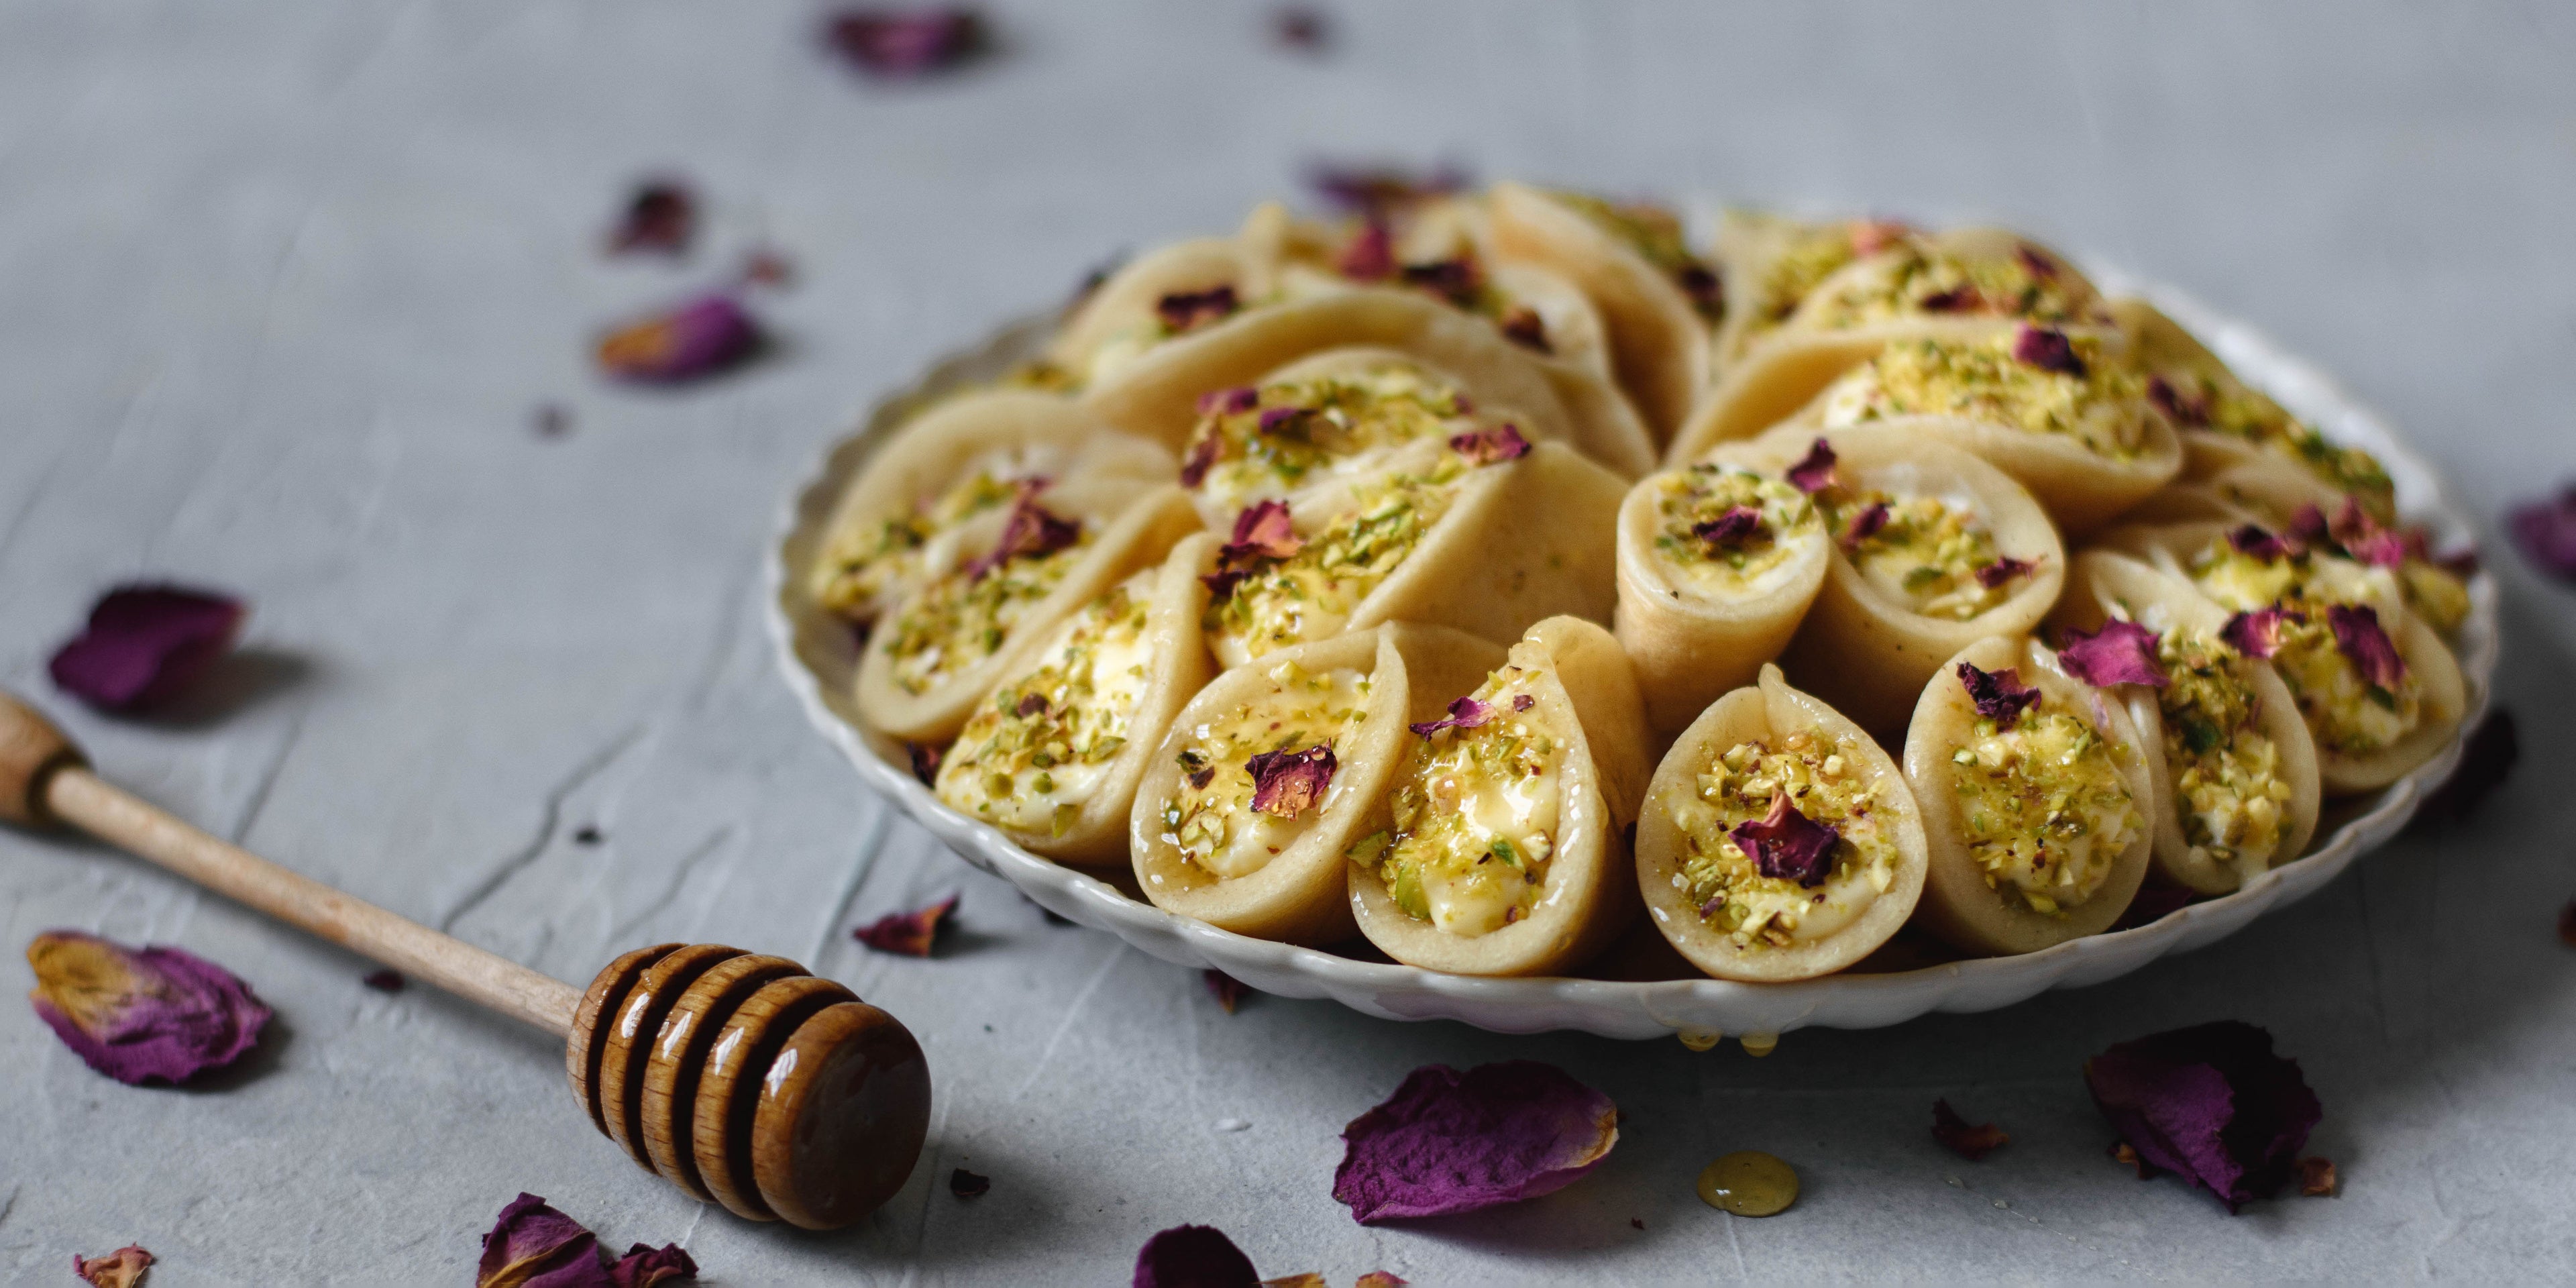 Plate of Qatayef with honey drizzler and petals